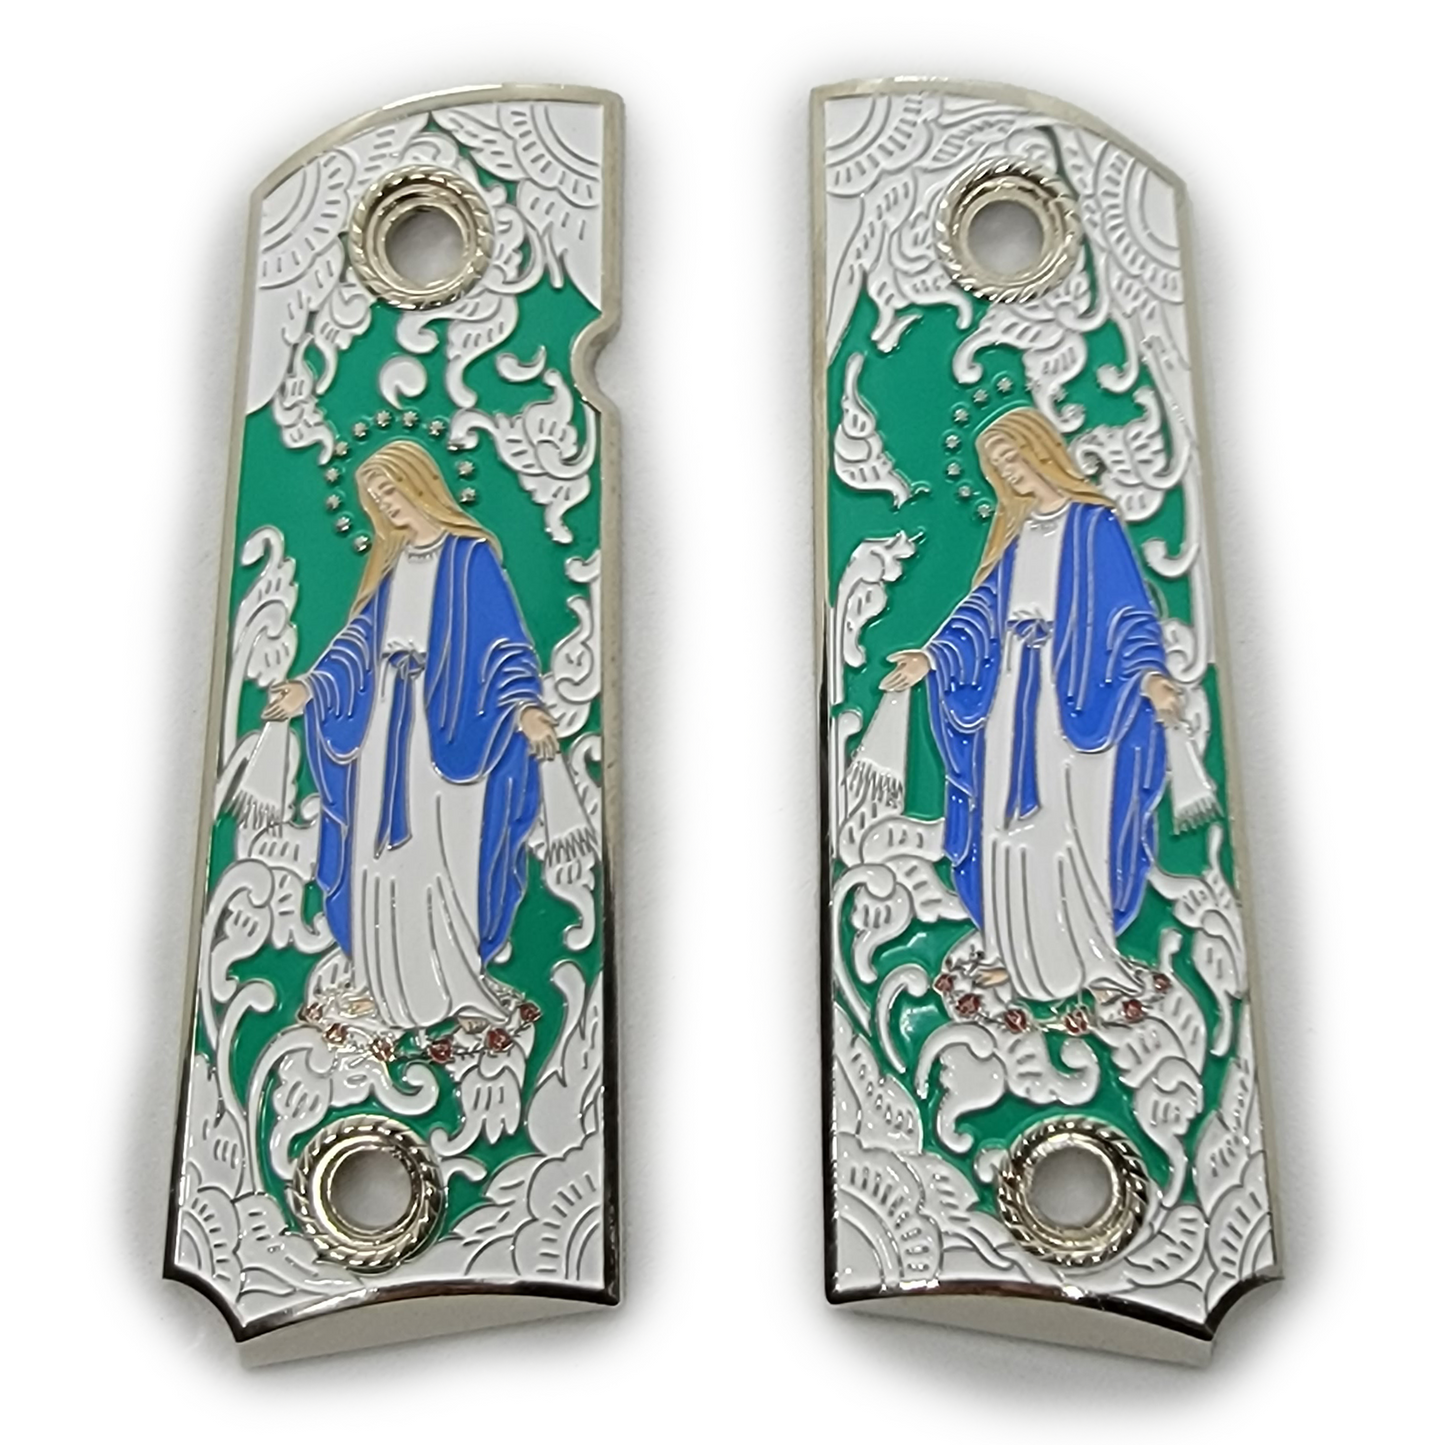 1911 Full Size Virgin Mary Gold Plated Grips W Soft Enamel